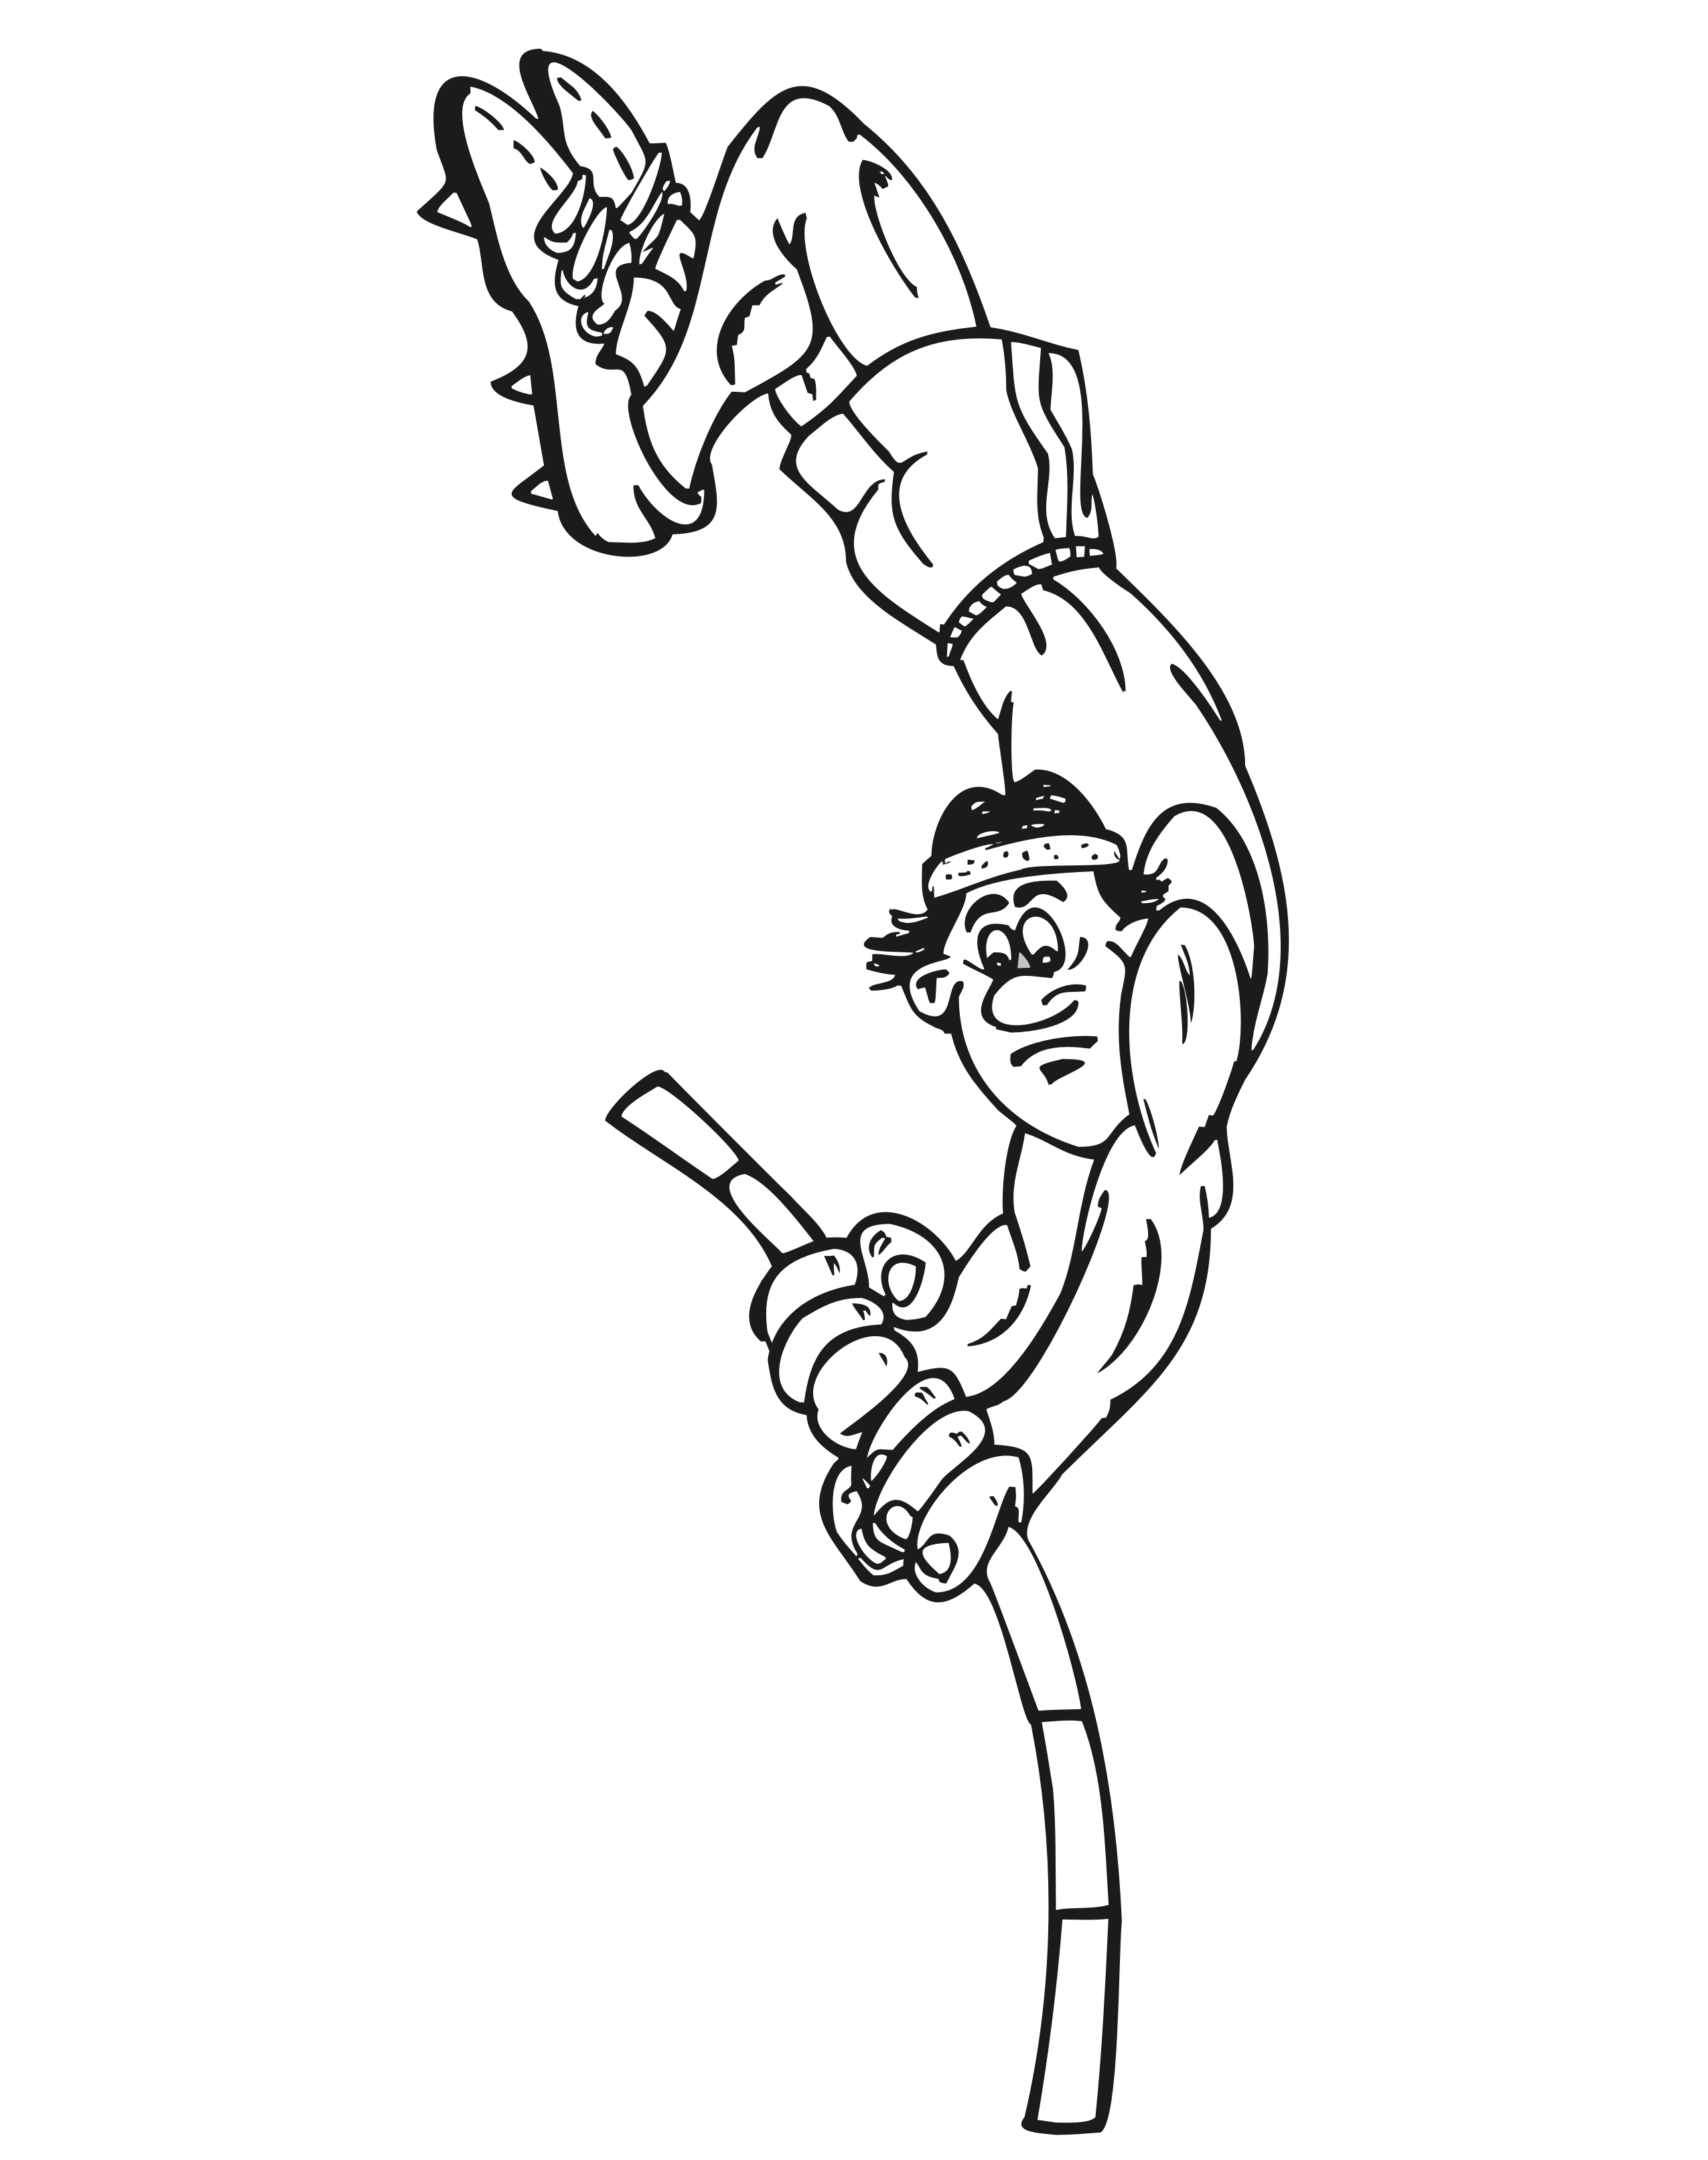 Summer Olympics coloring page of a pole vaulter